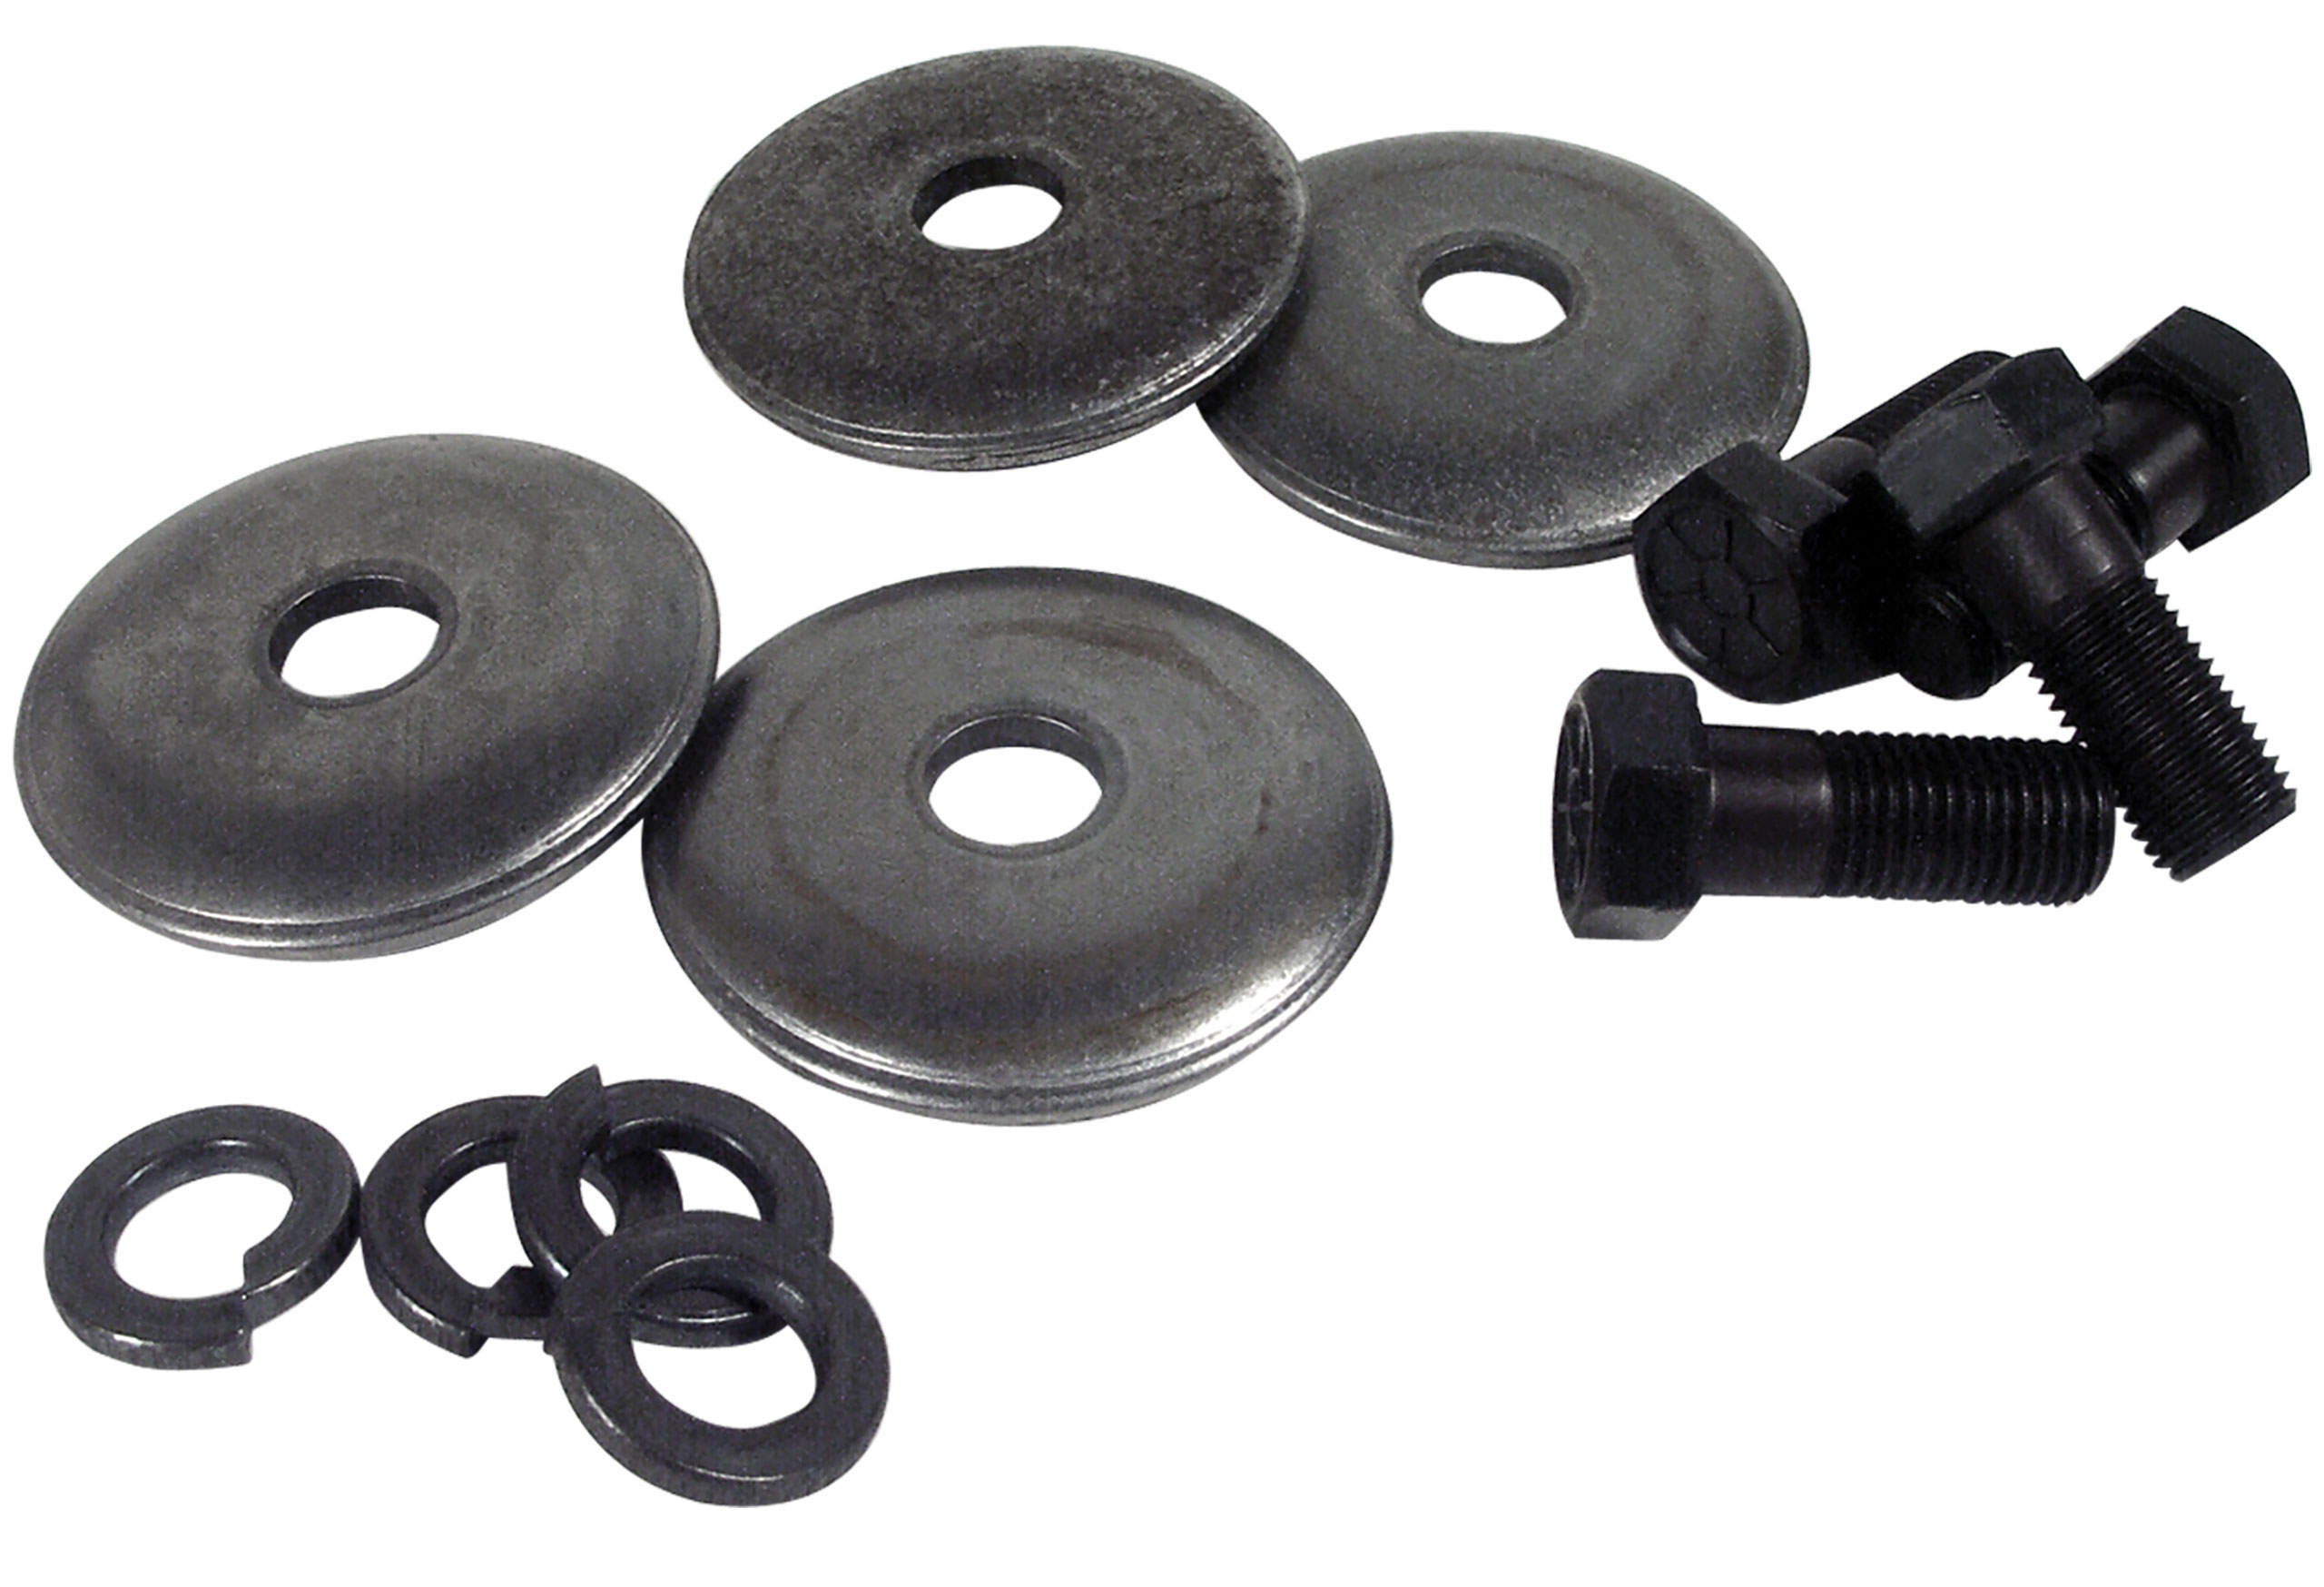 Auto Accessories of America 1963-1982 Chevrolet Corvette Lower A-Arm Bushing Retainer Bolts & Lockwashers. 12 Piece Set